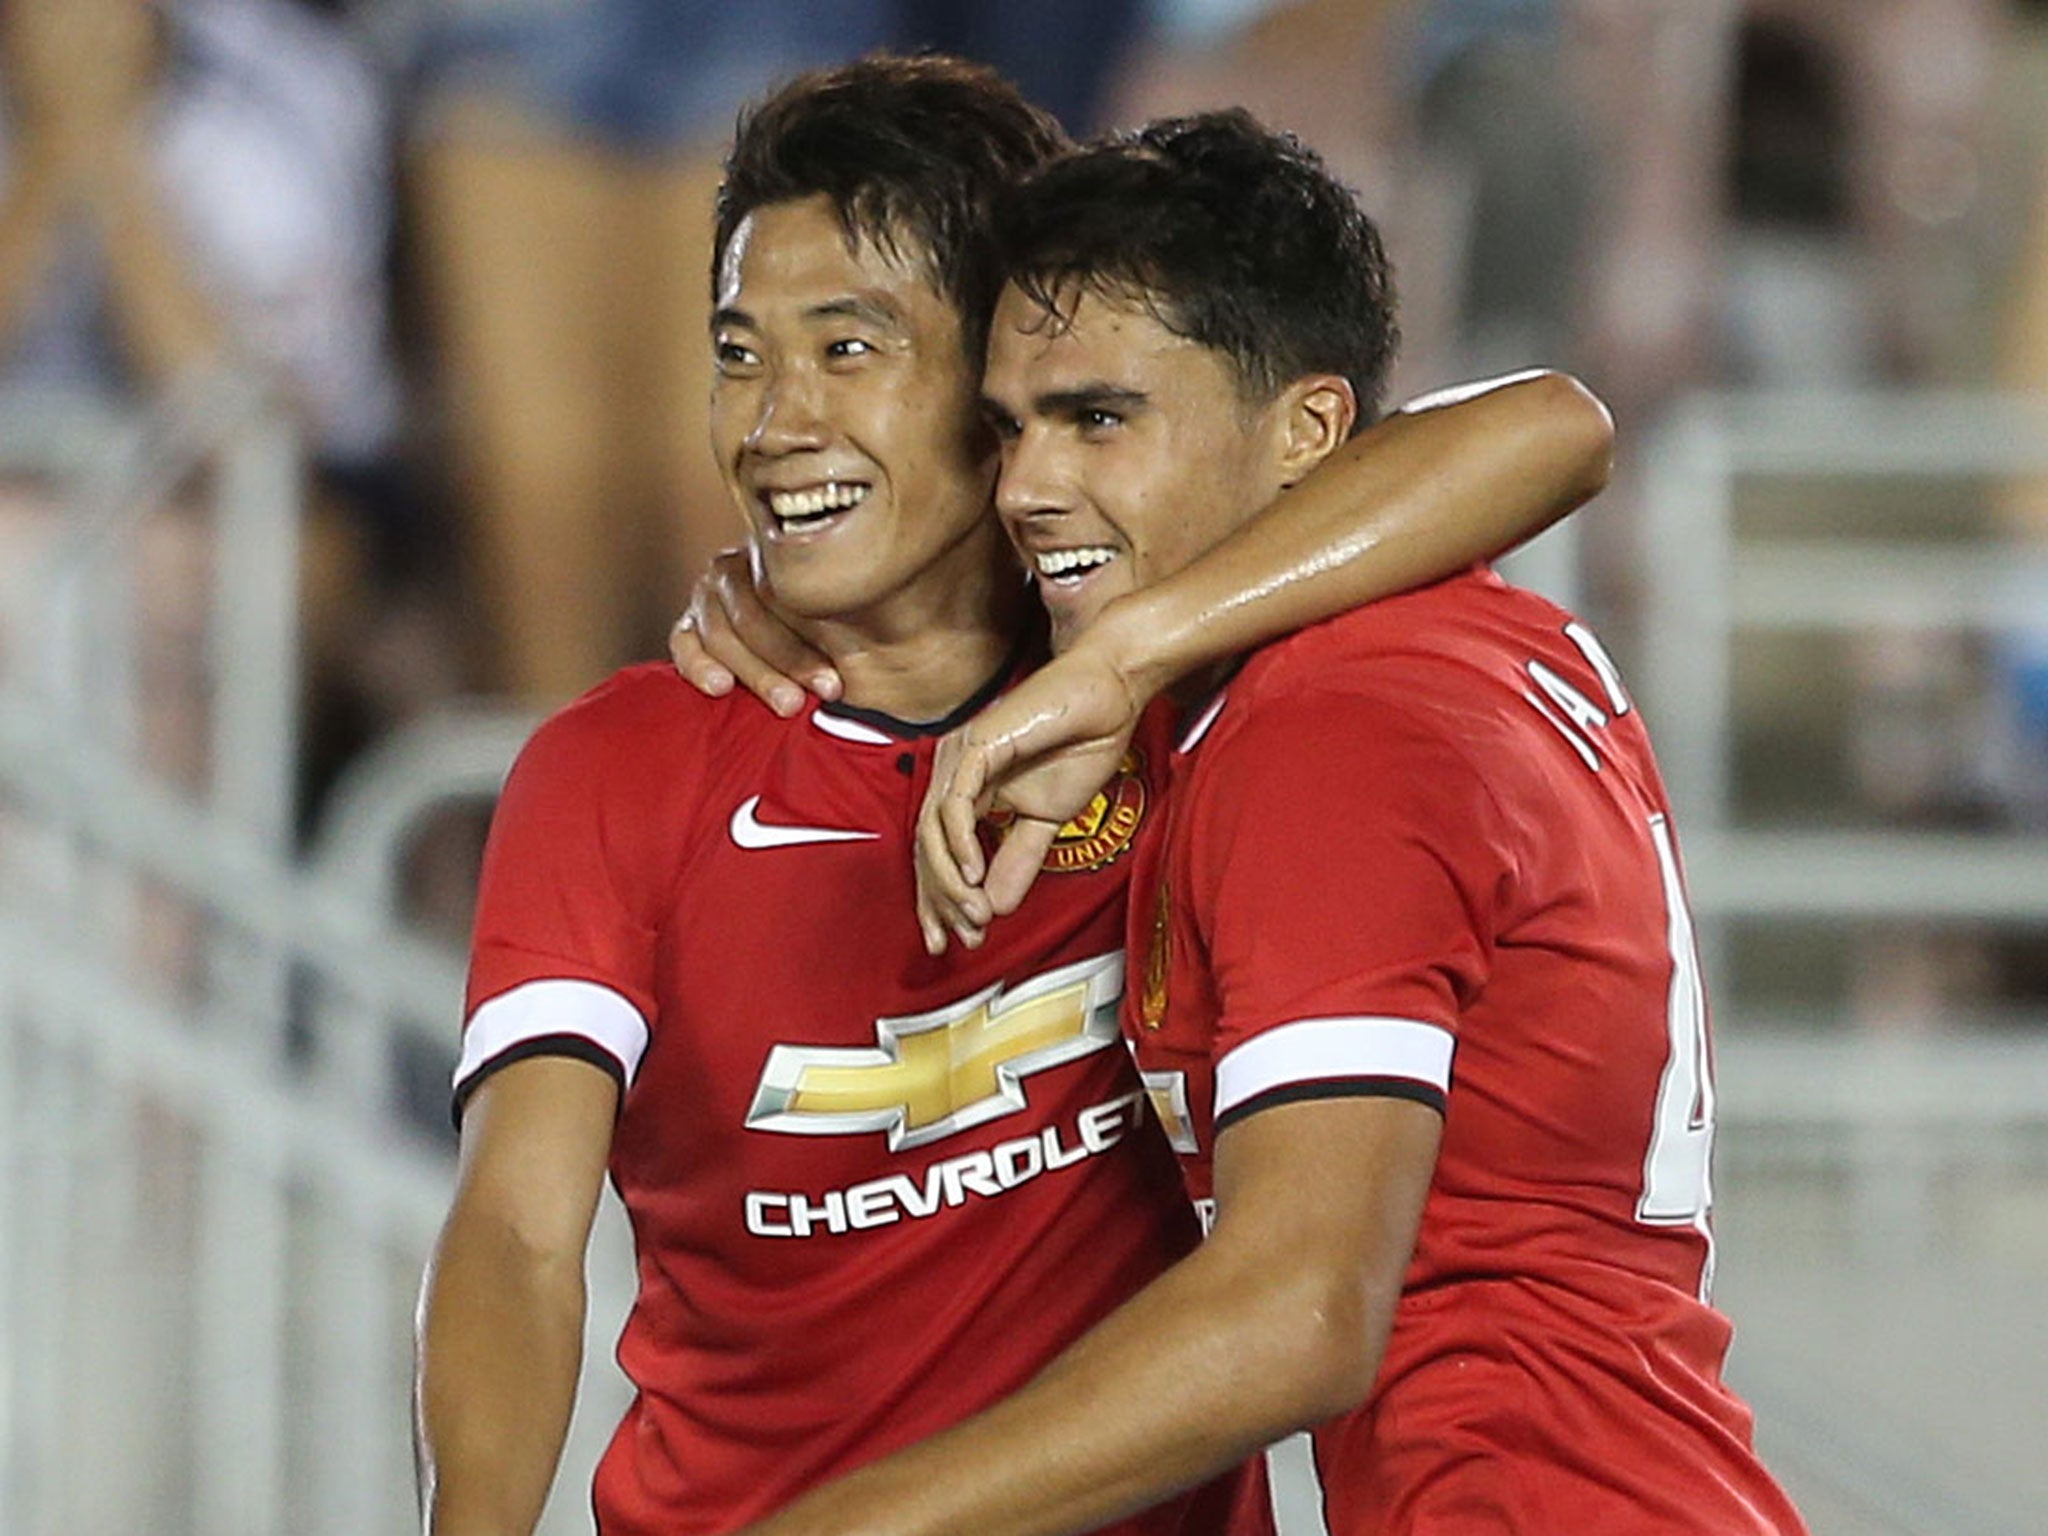 Shinji Kagawa and Reece James celebrate after the latter scores in Manchester United's 7-0 victory over LA Galaxy